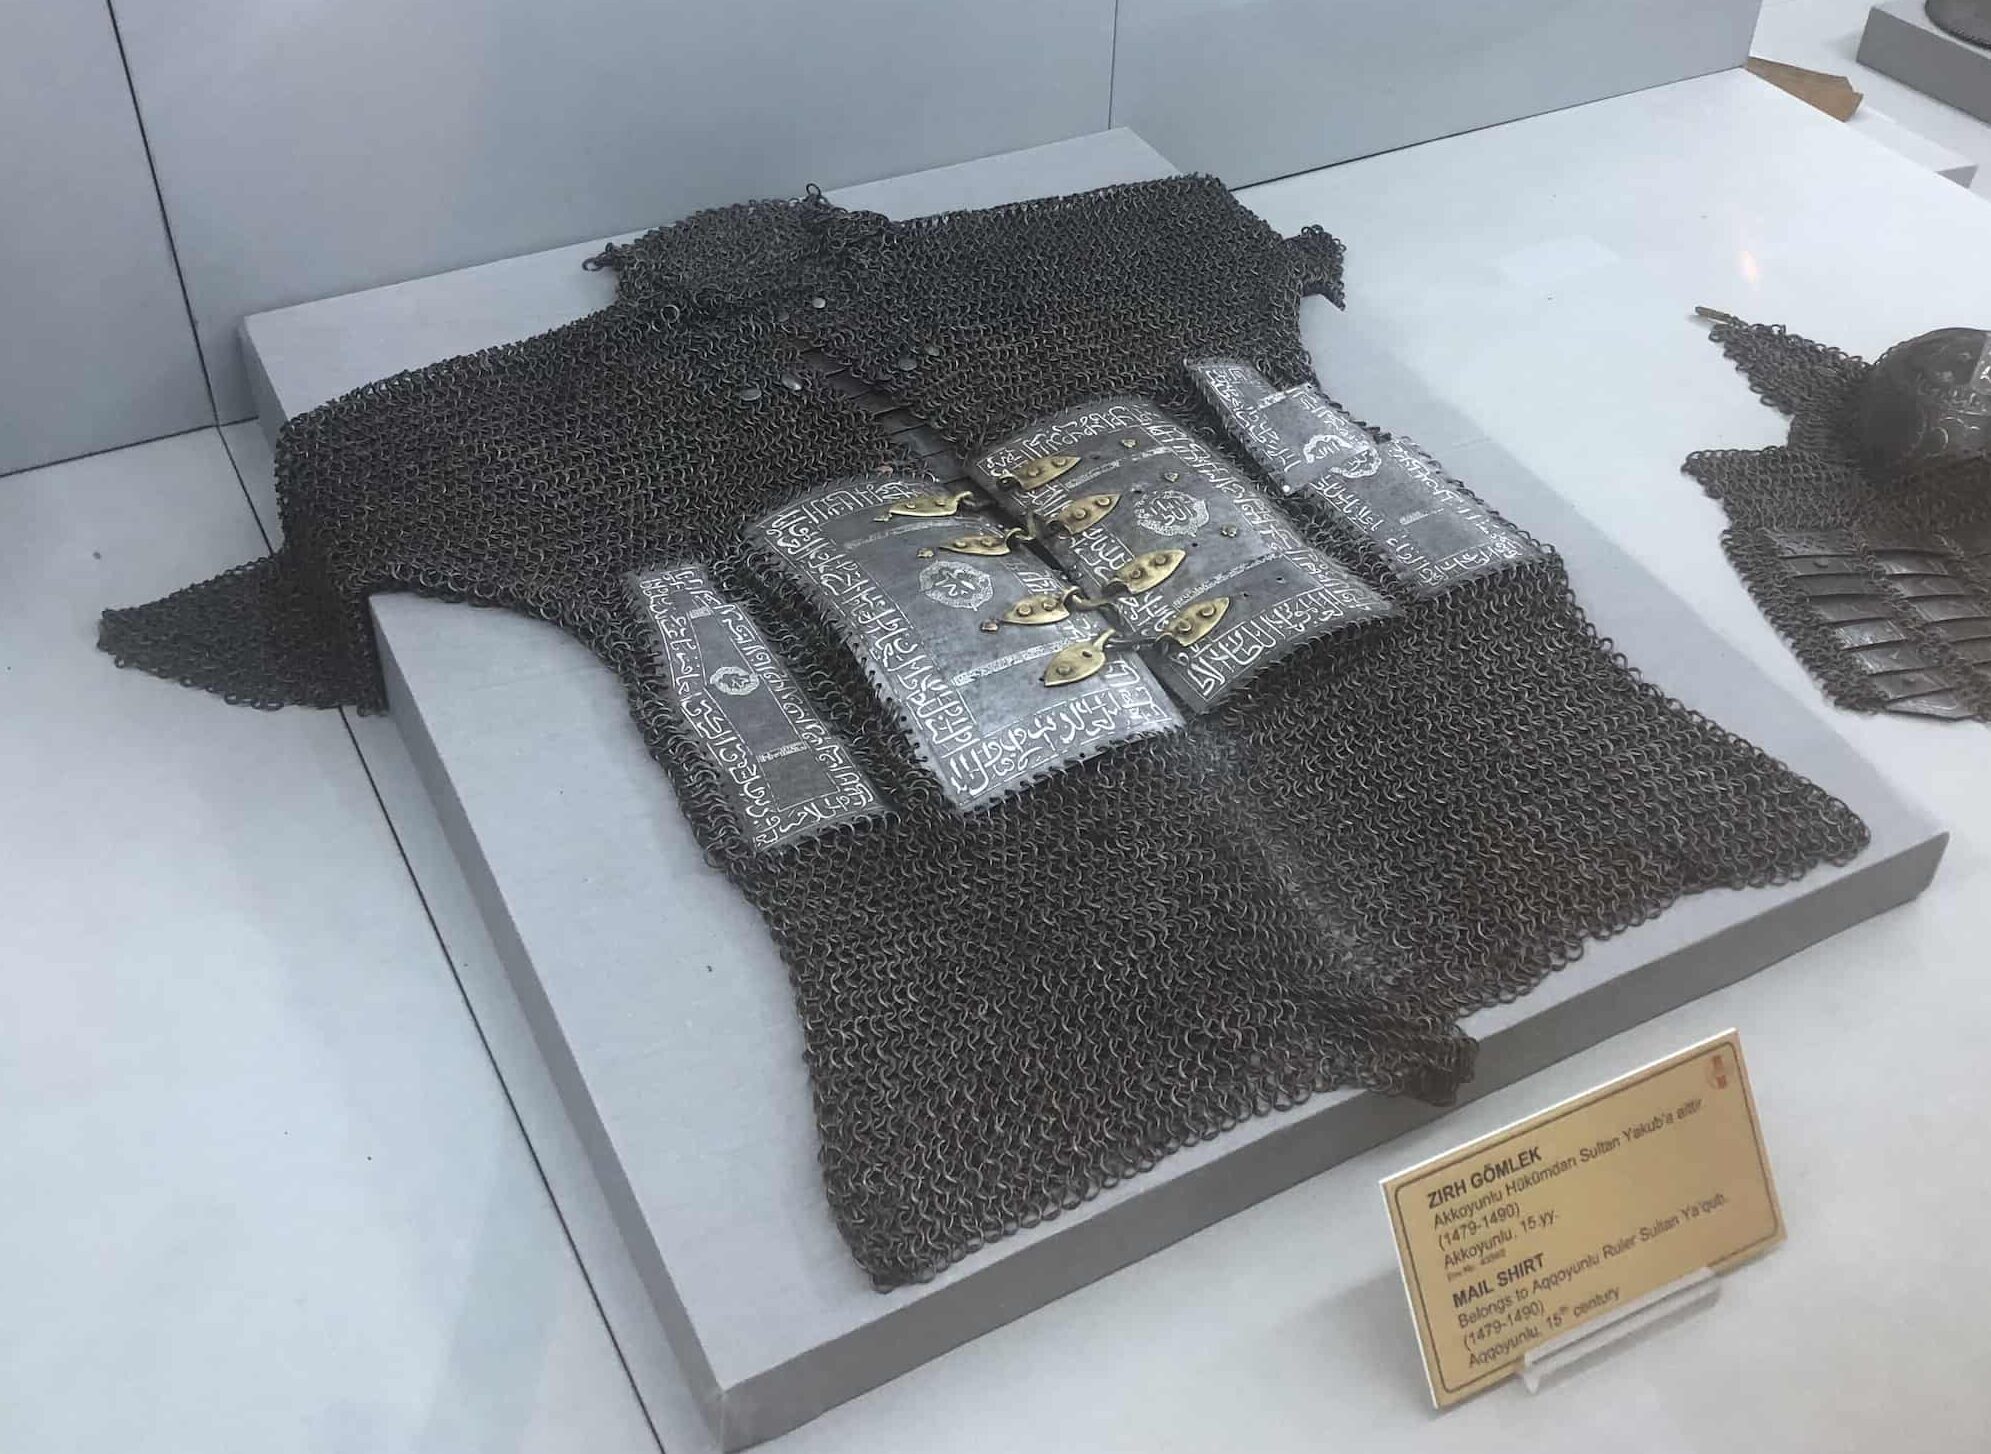 Chain mail shirt belonging to Aq Qoyunlu Sultan Ya'qub in Defence Weapons Hall 2 at the Harbiye Military Museum in Istanbul, Turkey